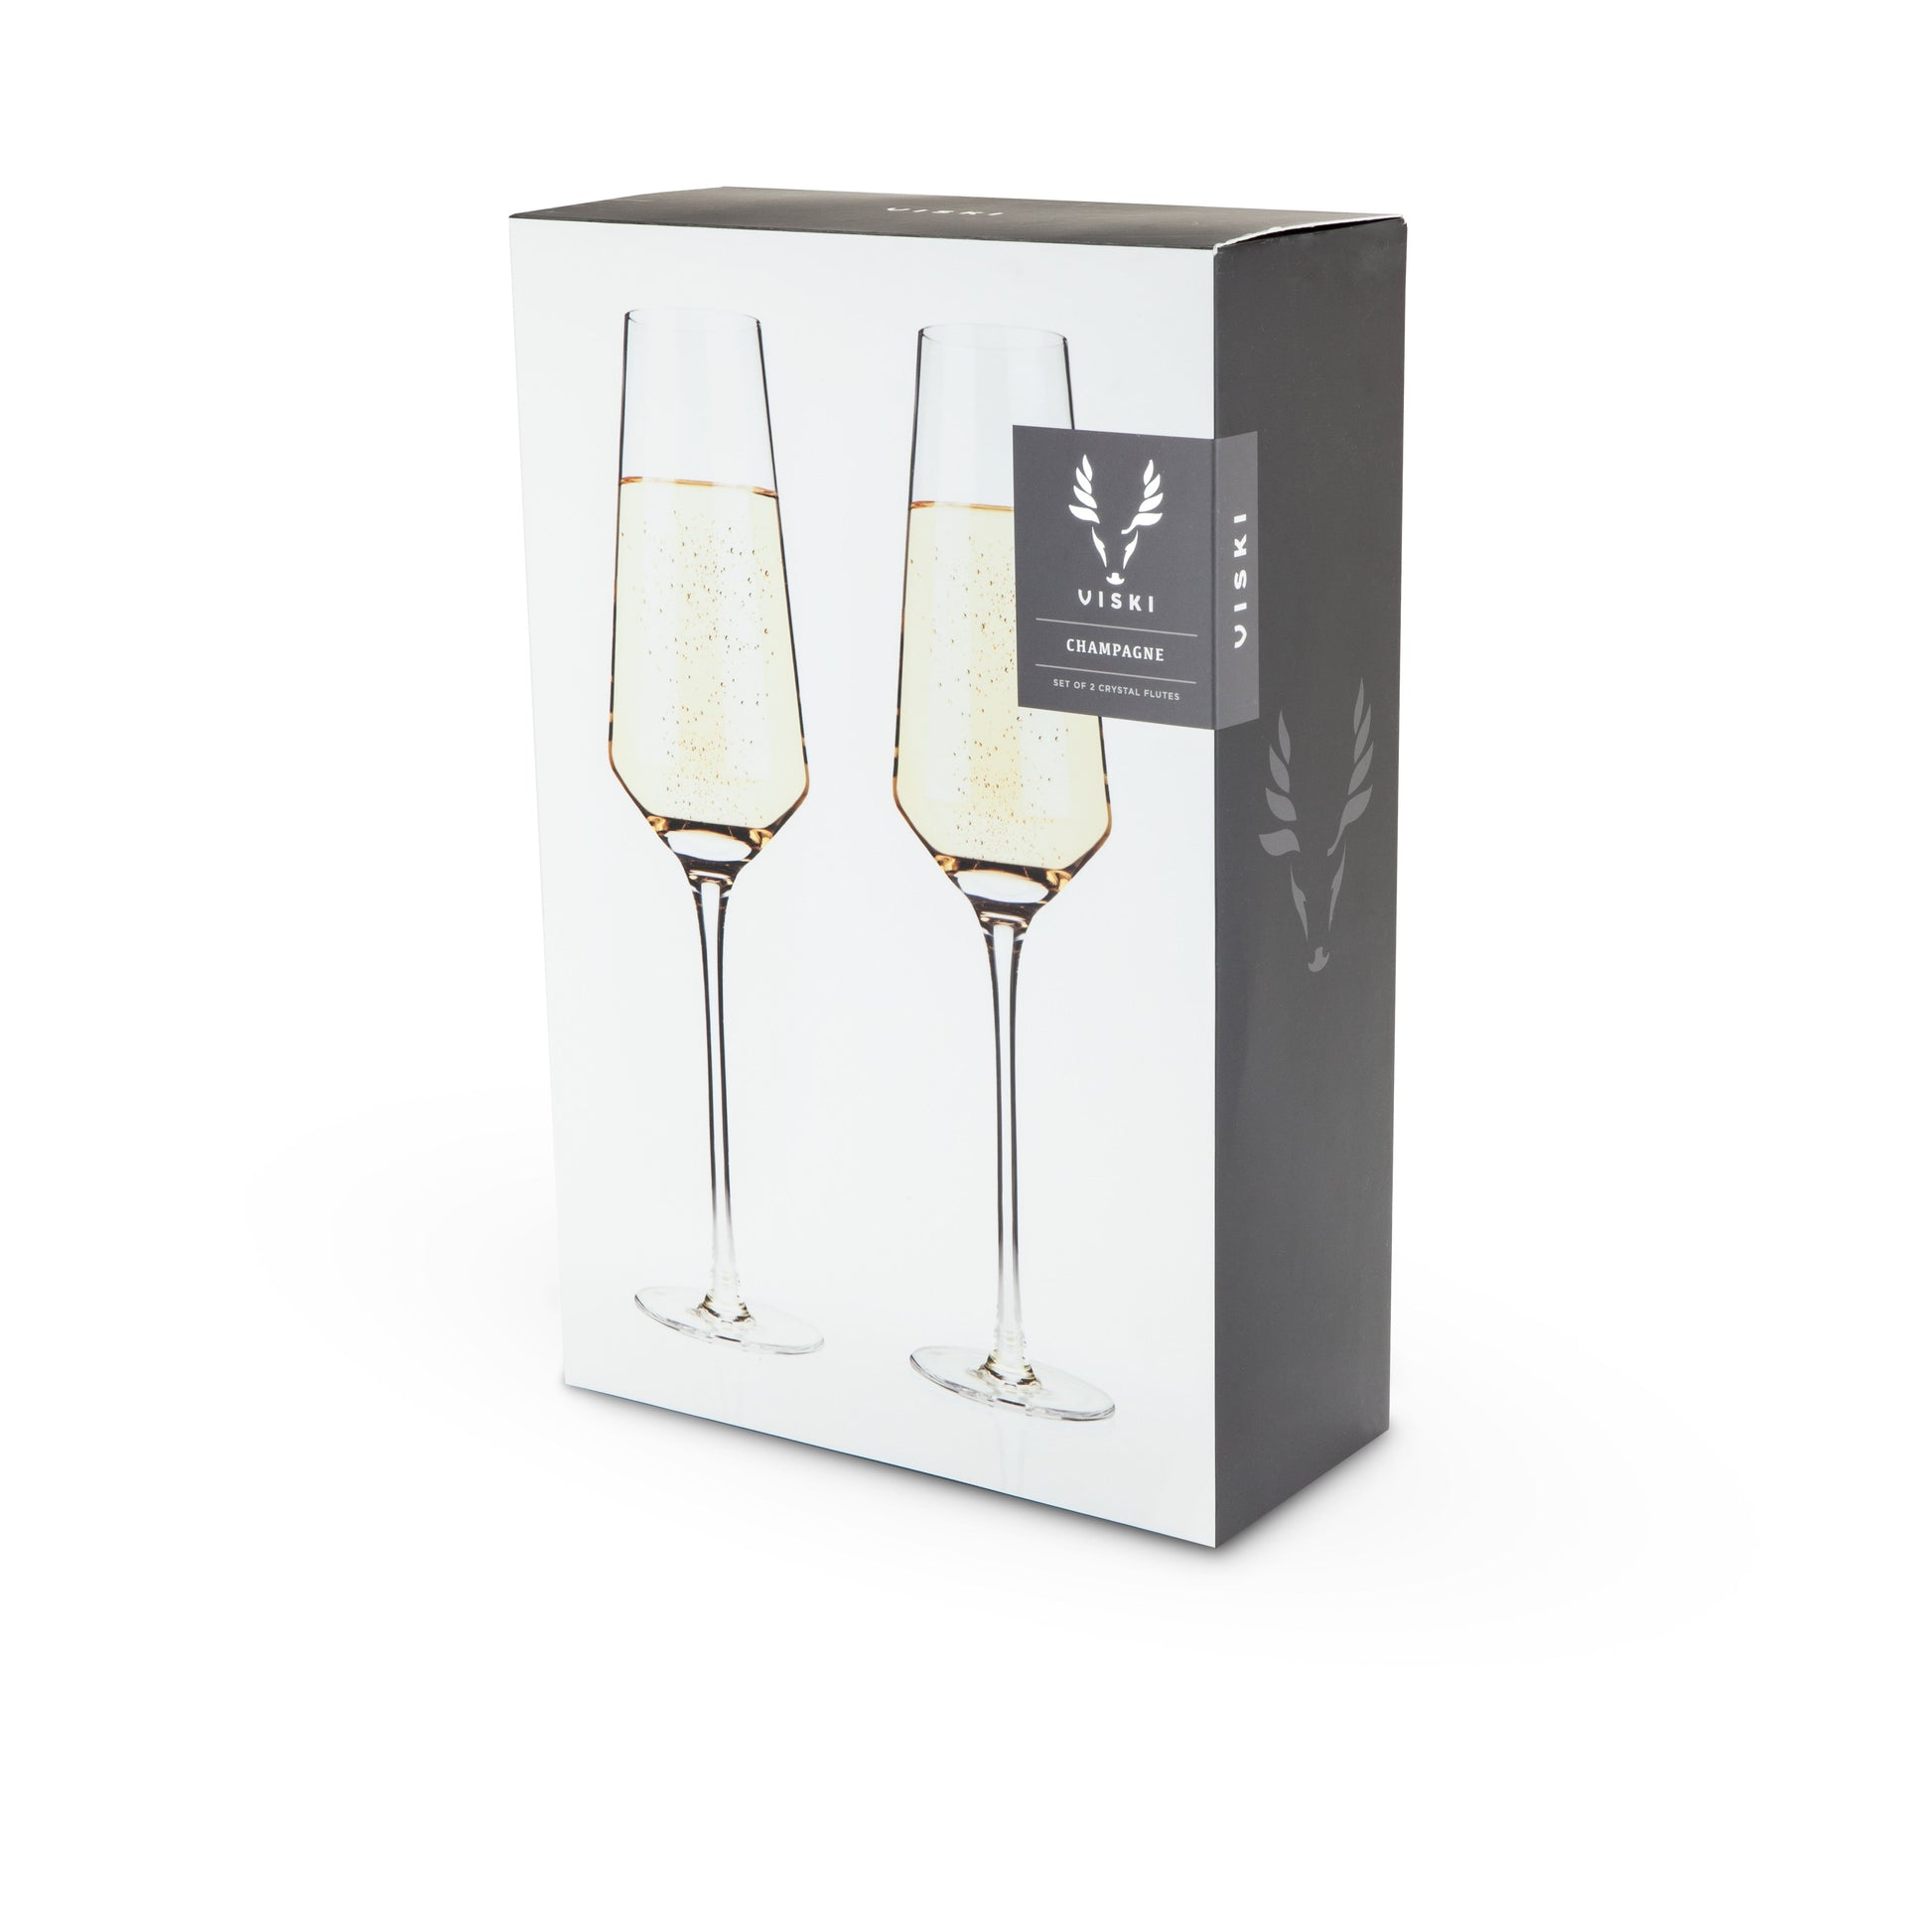 An angled base, faceted diamond design, and perfectly clear crystal give this set of champagne flutes otherworldly sparkle. Add contemporary glam to your Prosecco, champagne cocktails, and mimosas with this stemmed glassware.